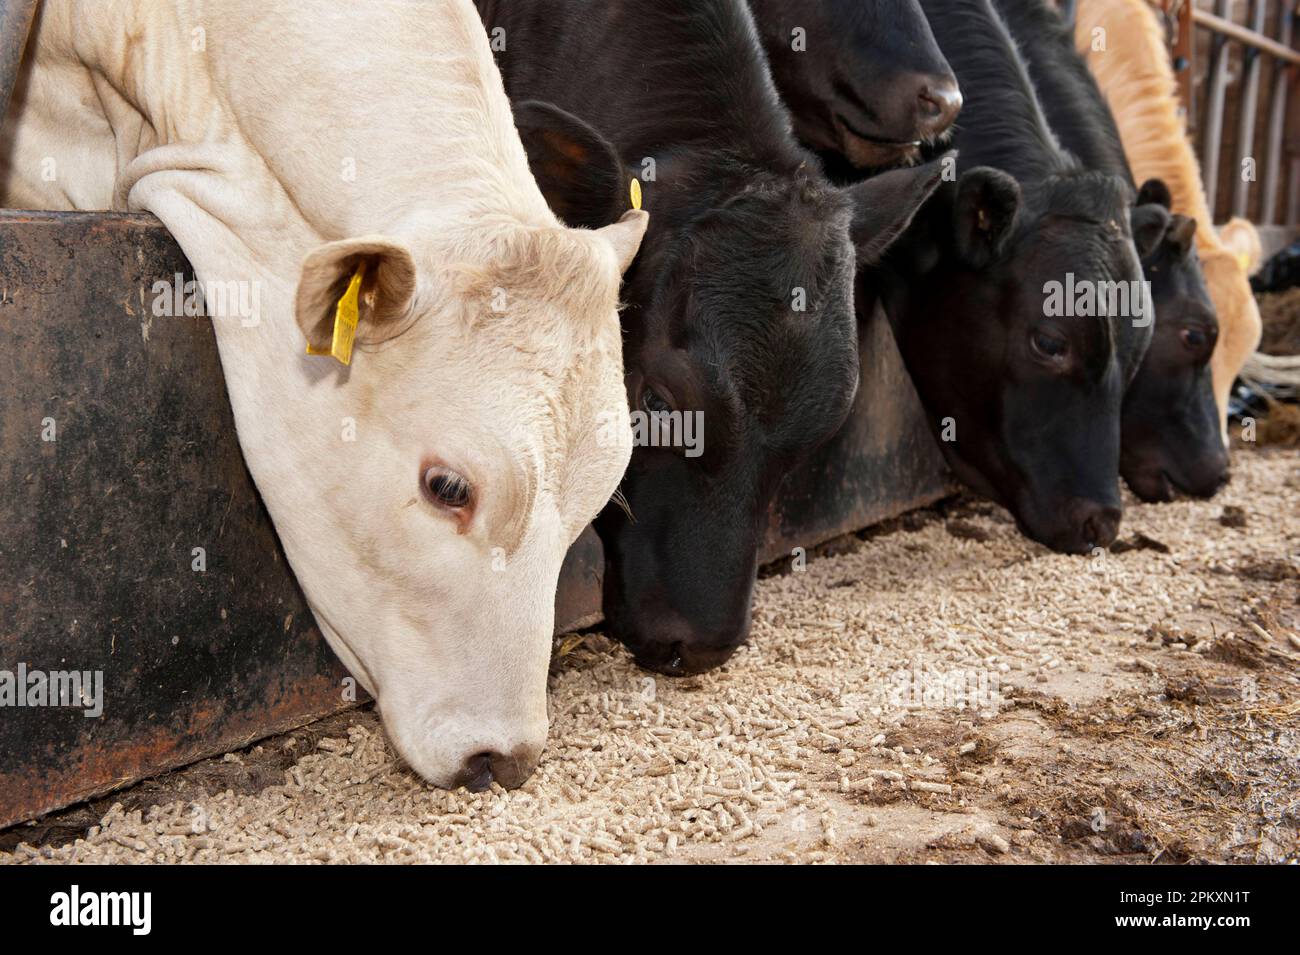 Domestic Cattle, suckler herd, feeding on concentrate feed through feed barrier, England, United Kingdom Stock Photo